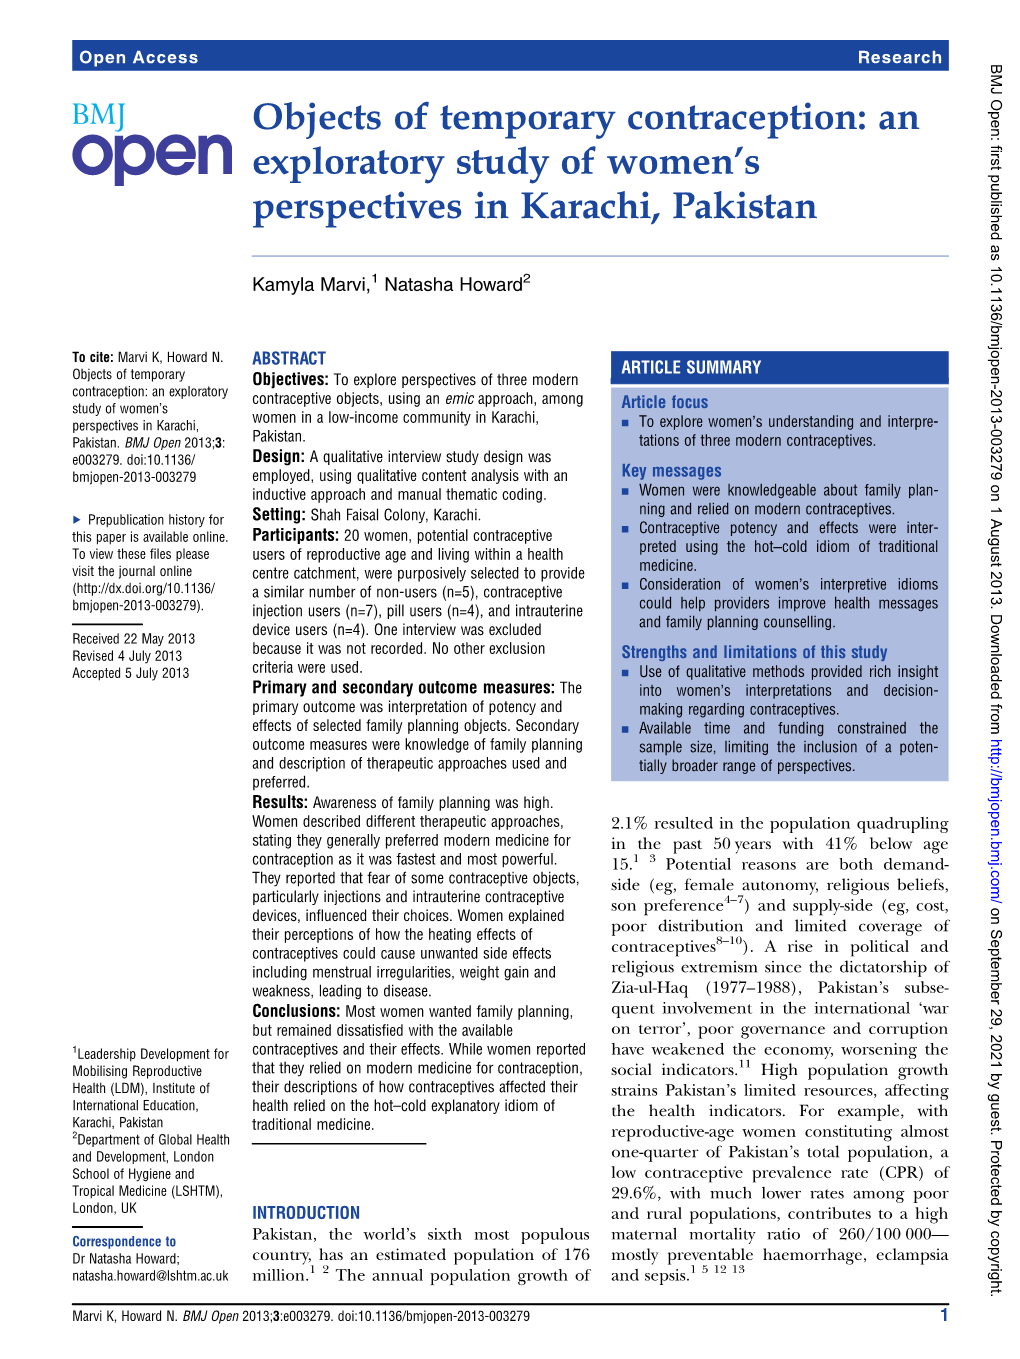 Objects of Temporary Contraception: an Exploratory Study of Women's Perspectives in Karachi, Pakistan